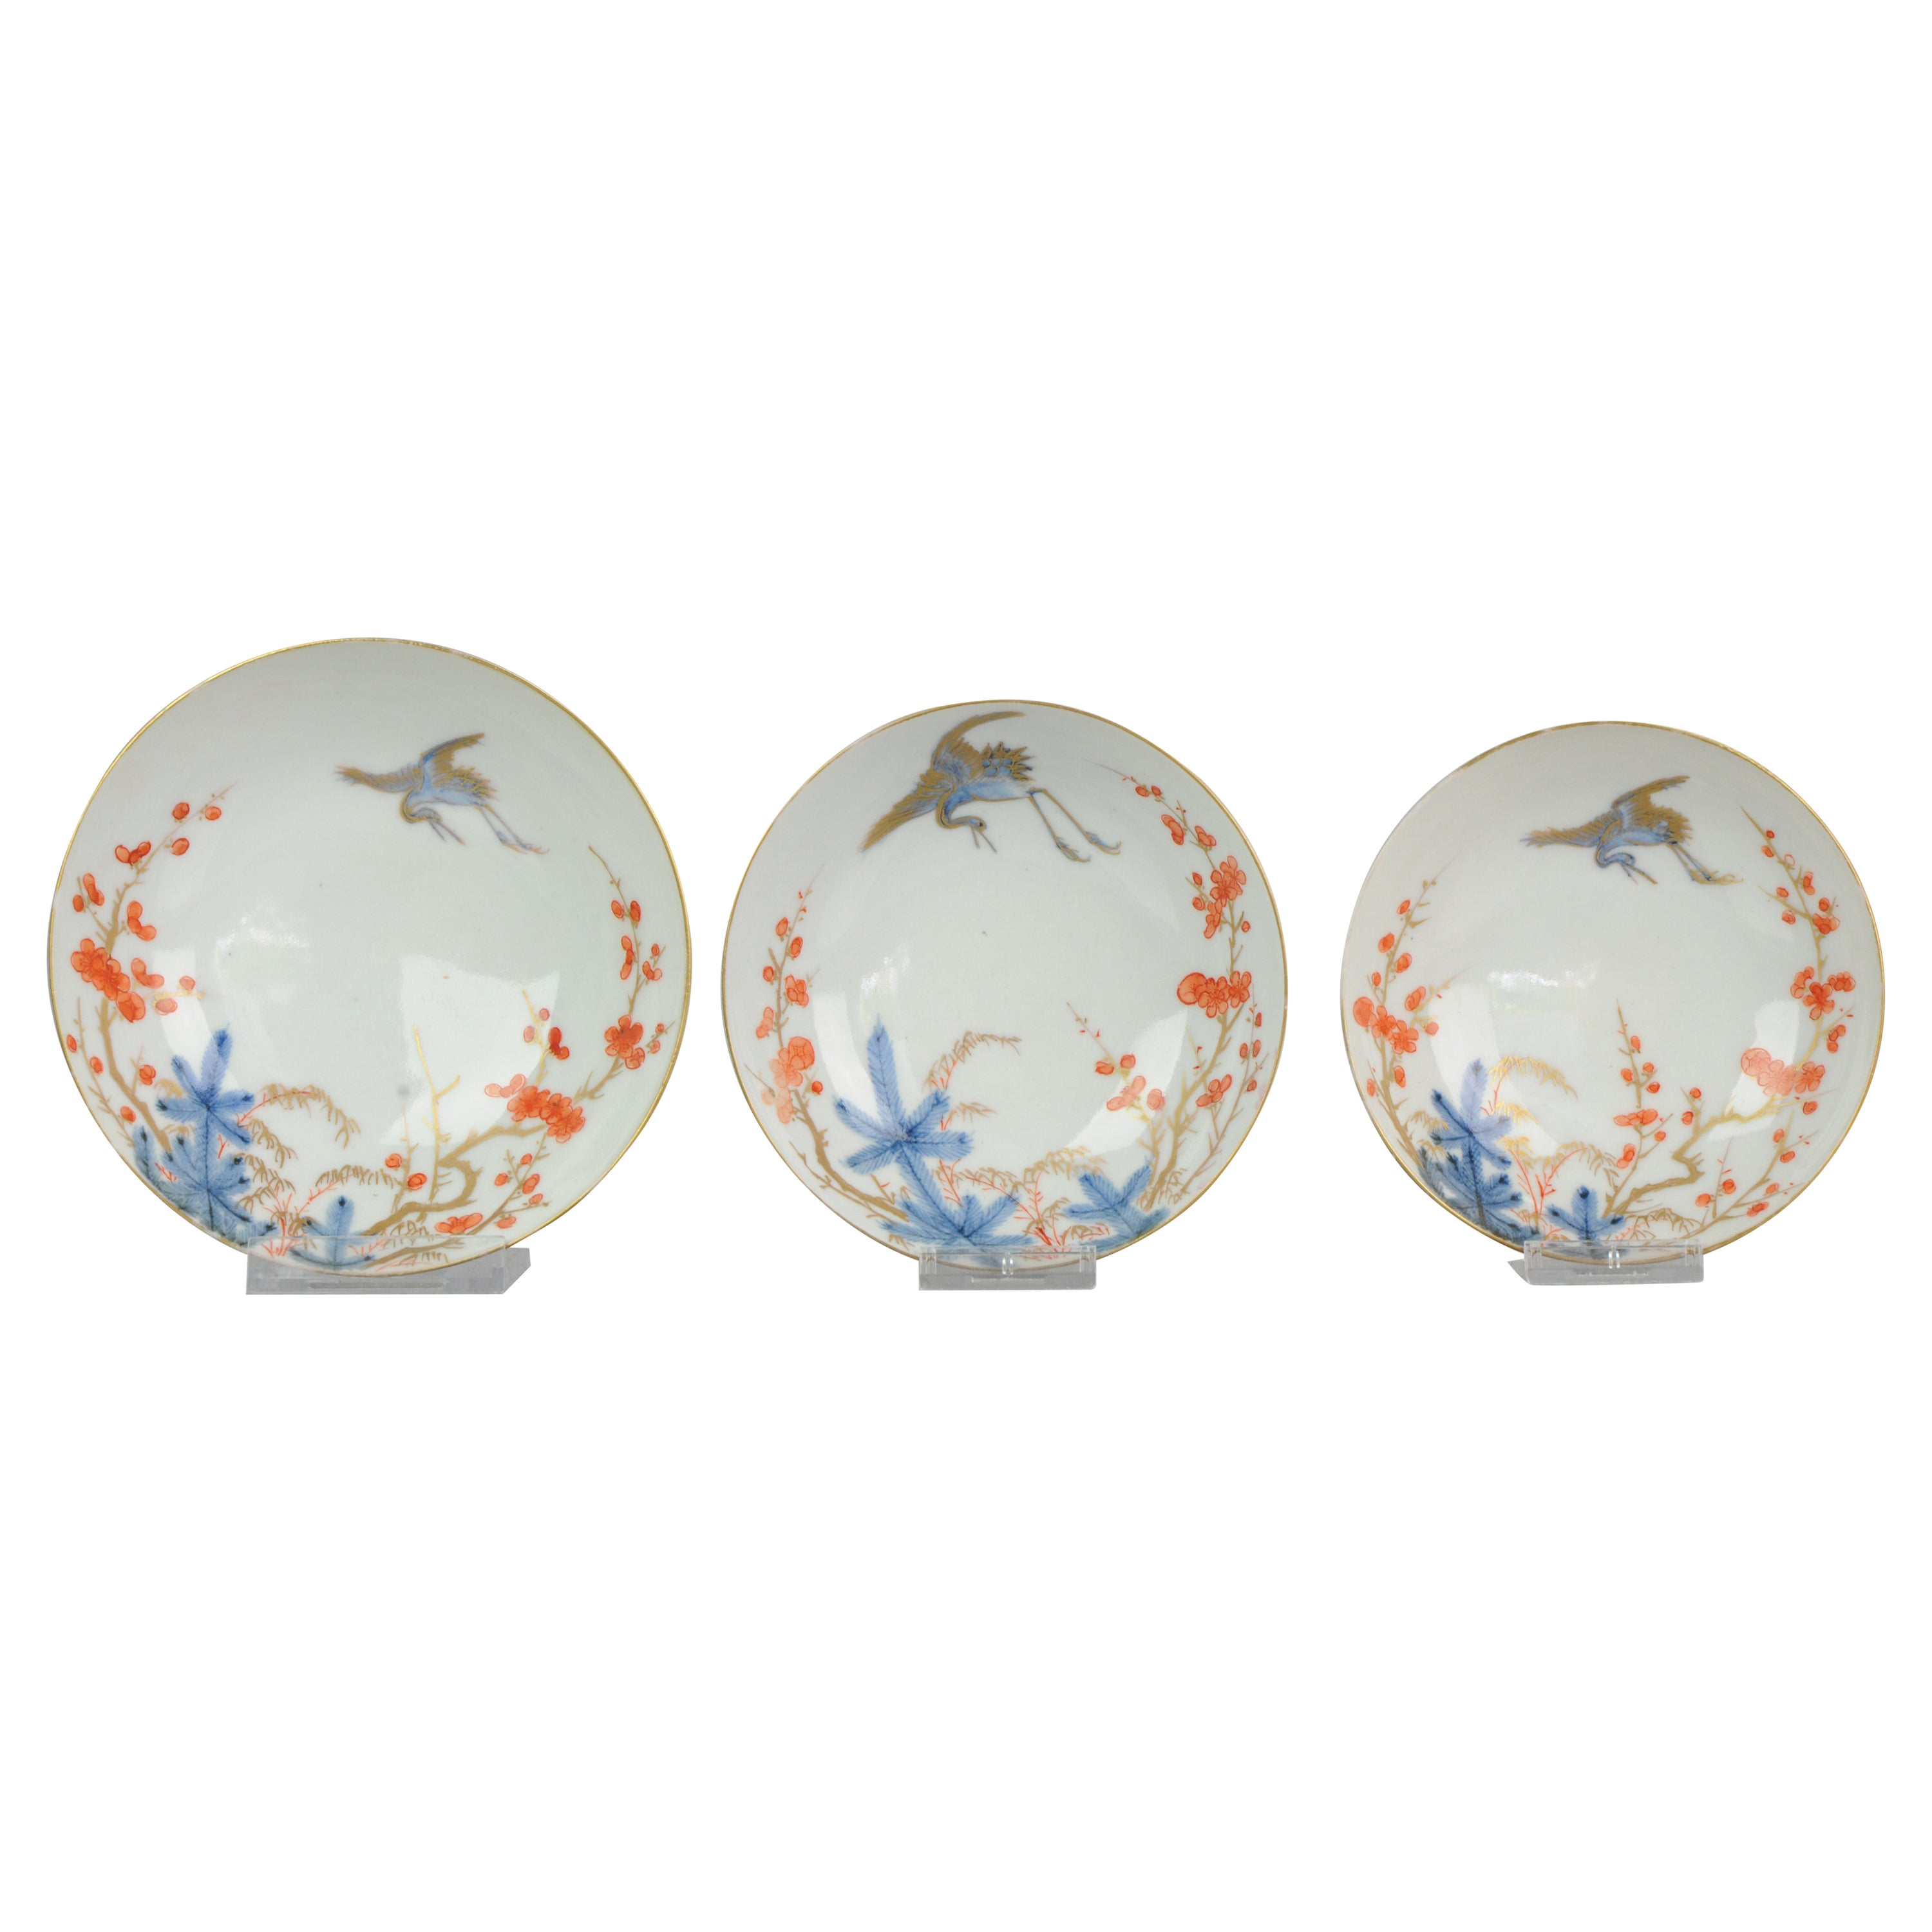 Set of 3 Antique Japanese Footed Bowls Porcelain Dish Japan, 18/19th Century For Sale